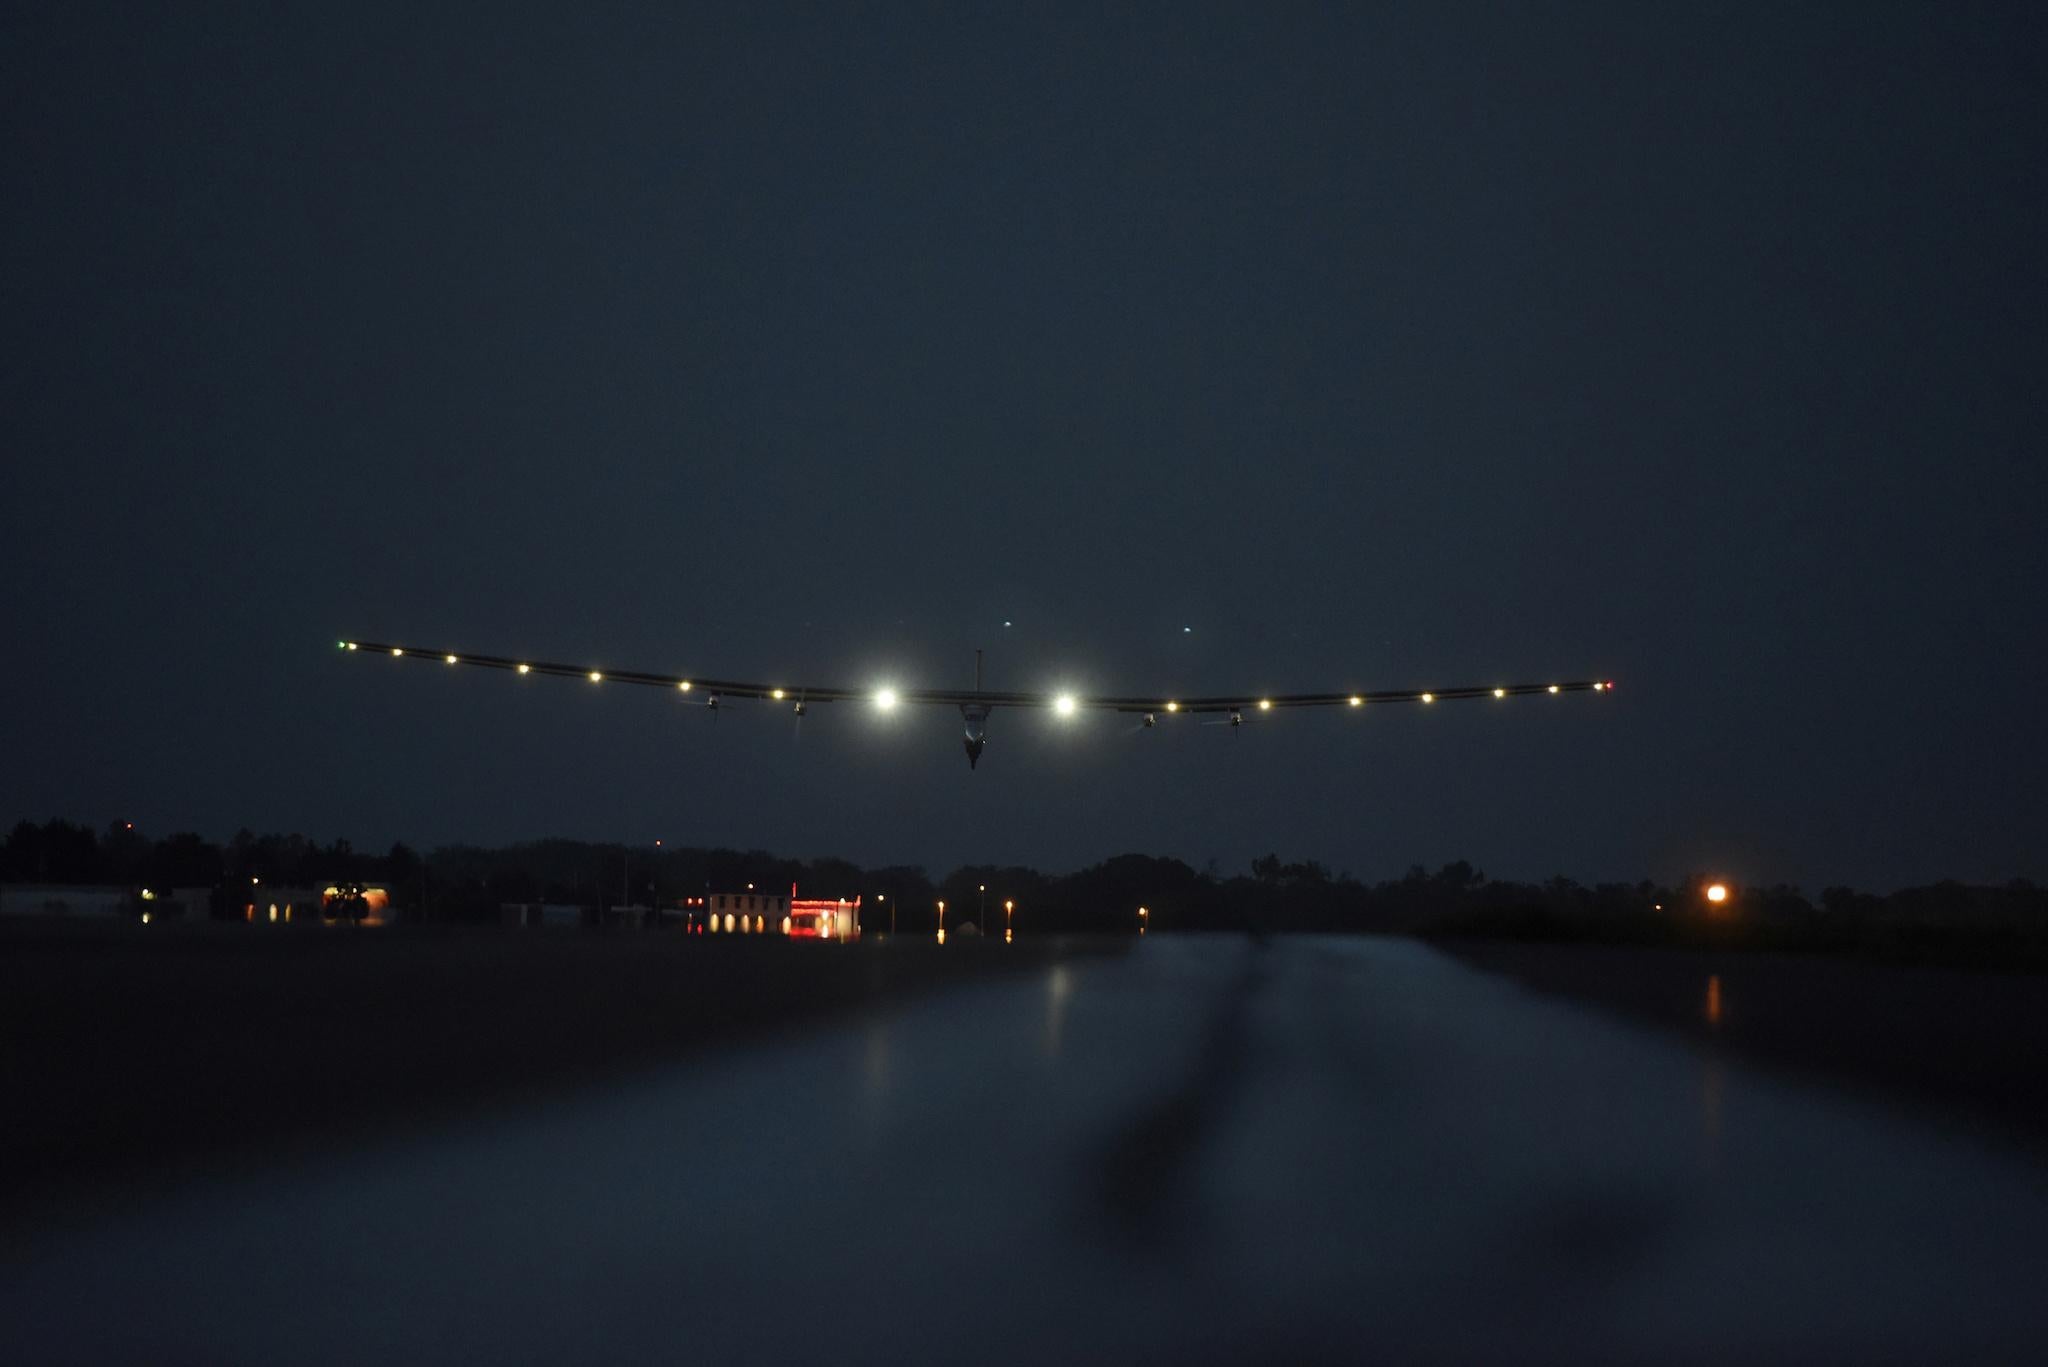 The solar powered airplane Solar Impulse 2 with Bertrand Piccard at the controls is seen landing at Lehigh Valley International Airport